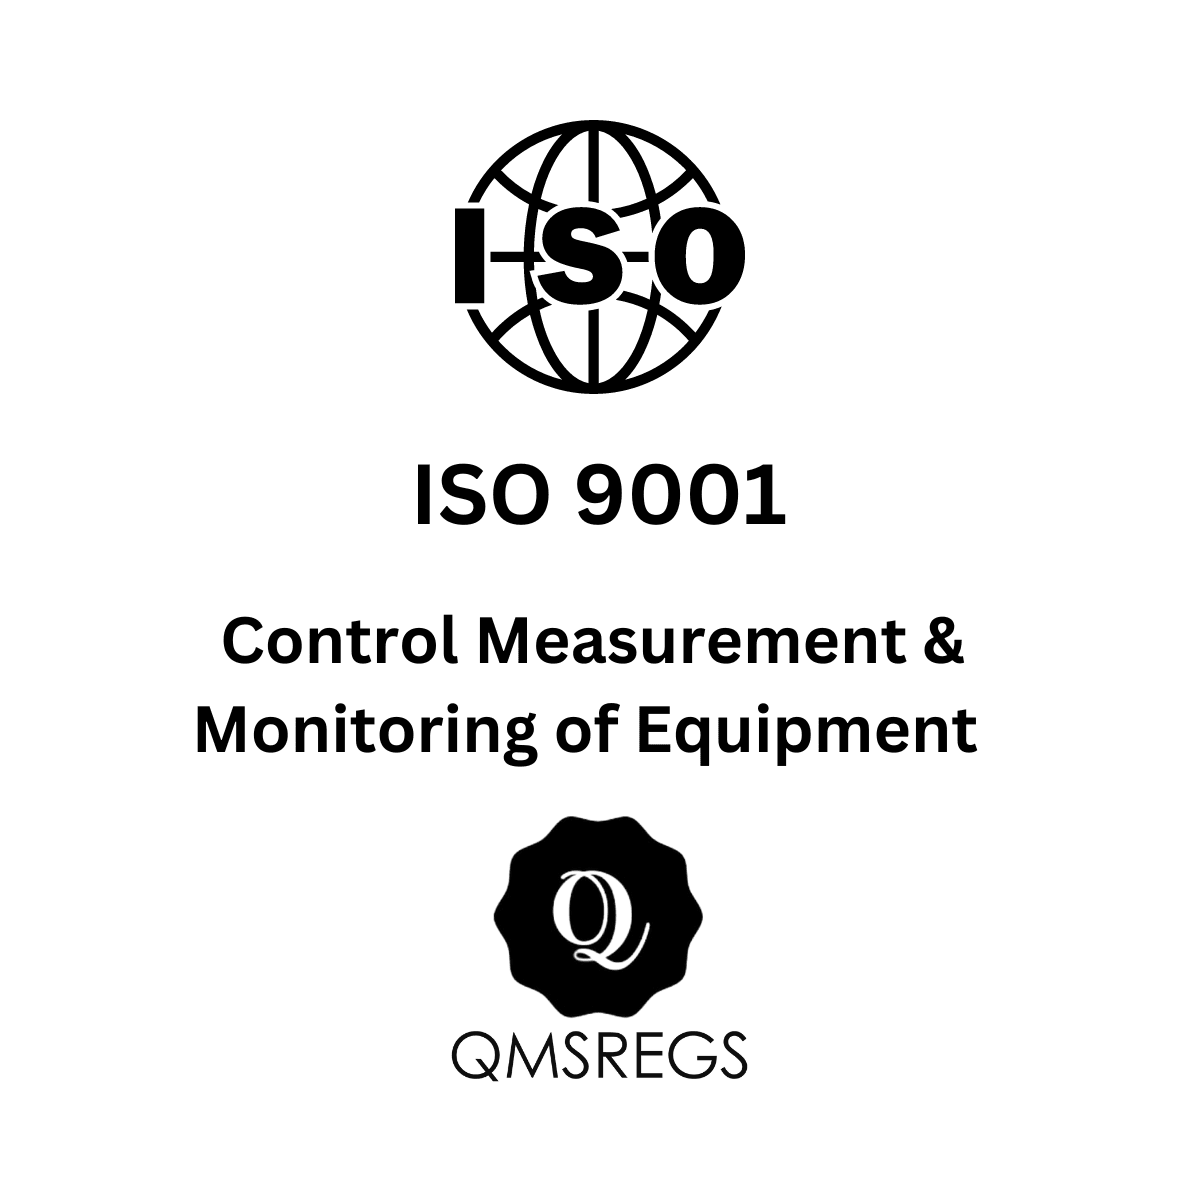 ISO 9001 Control of Measurement and Monitoring of Equipment Procedure